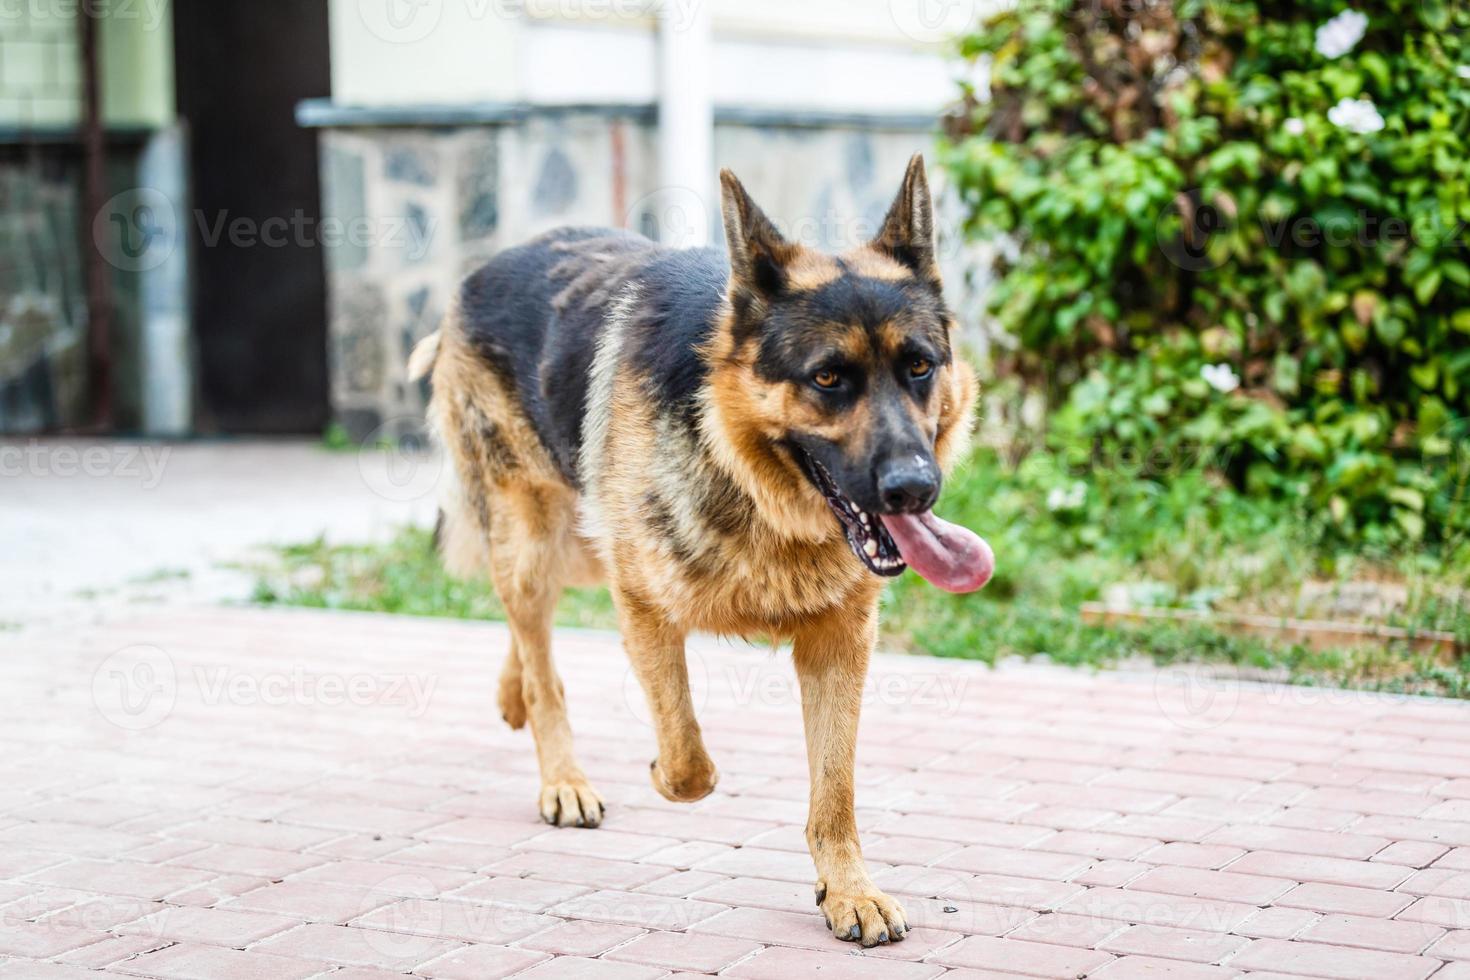 A long-haired German shepherd in the yard photo